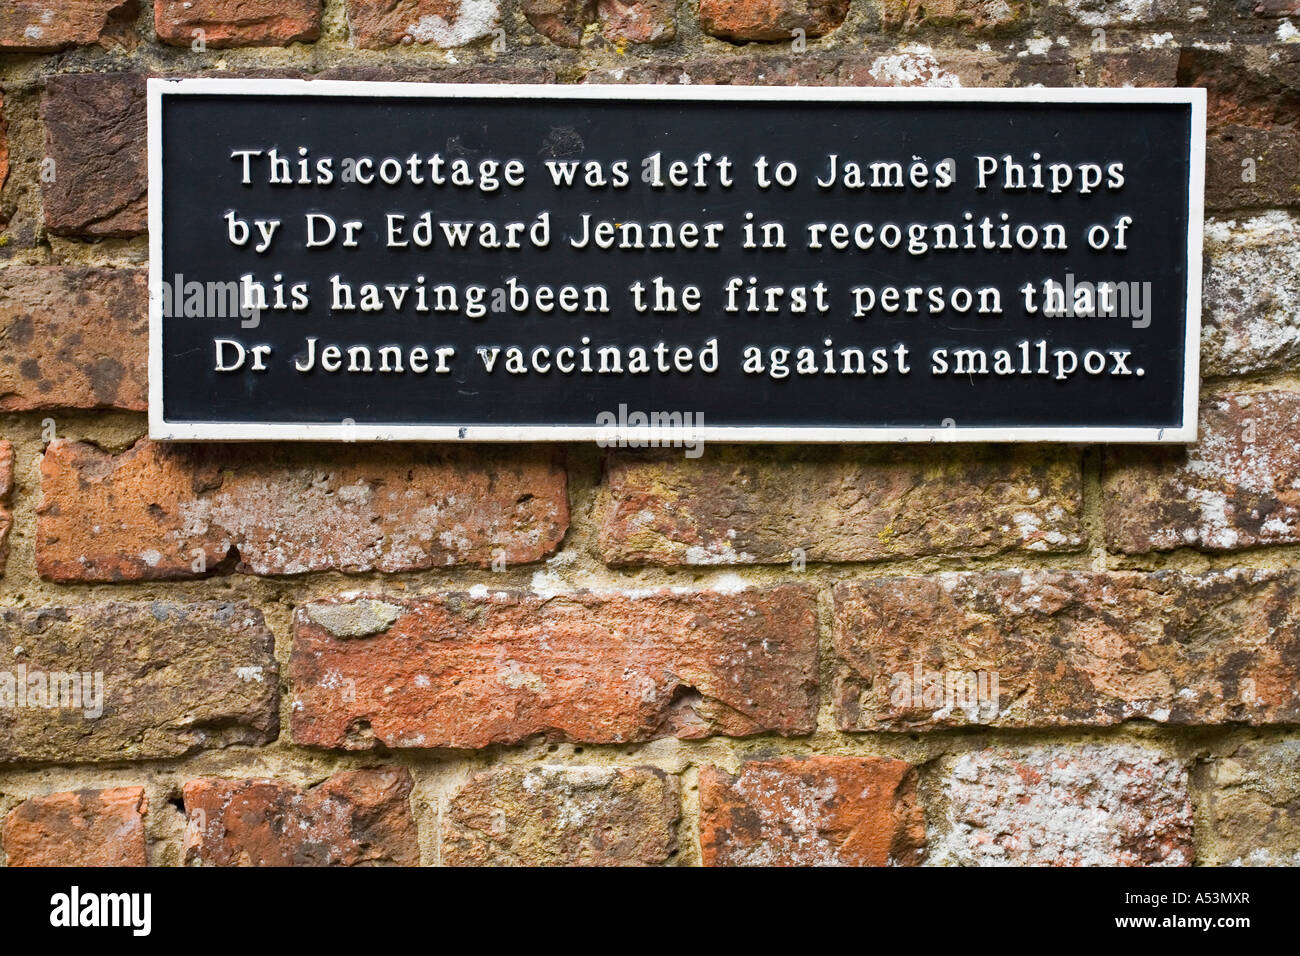 Plaque to commemorate gift of cottage to James Phipps by Dr Edward Jenner discoverer of vaccination against smallpox at Berkeley Stock Photo